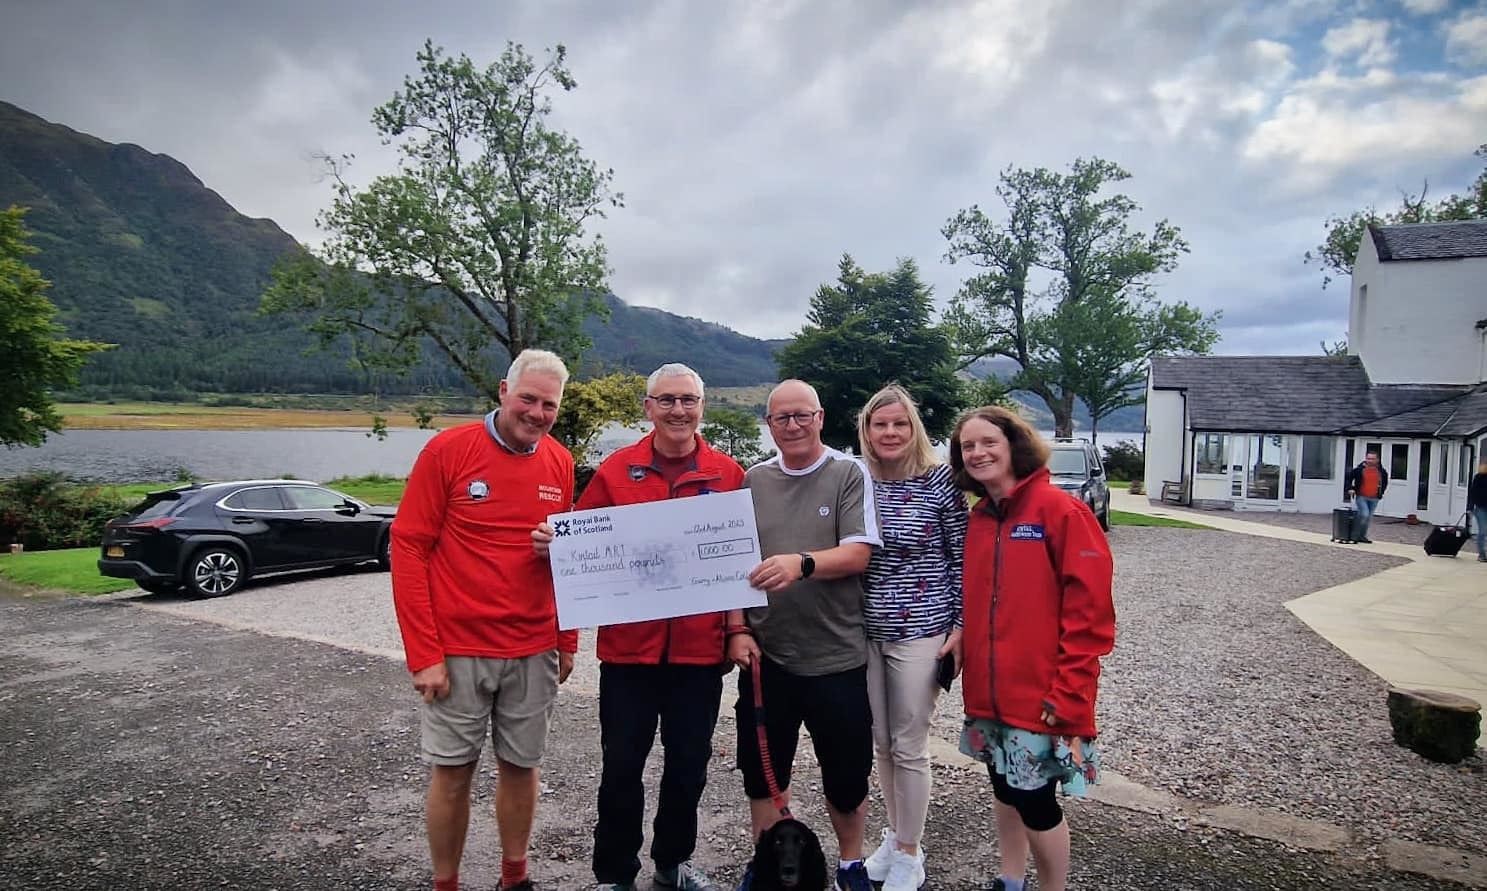 Kintail Mountain Rescue team members with Garry Collins who made a donation after he was rescued earlier this year. Picture: Kintail MRT